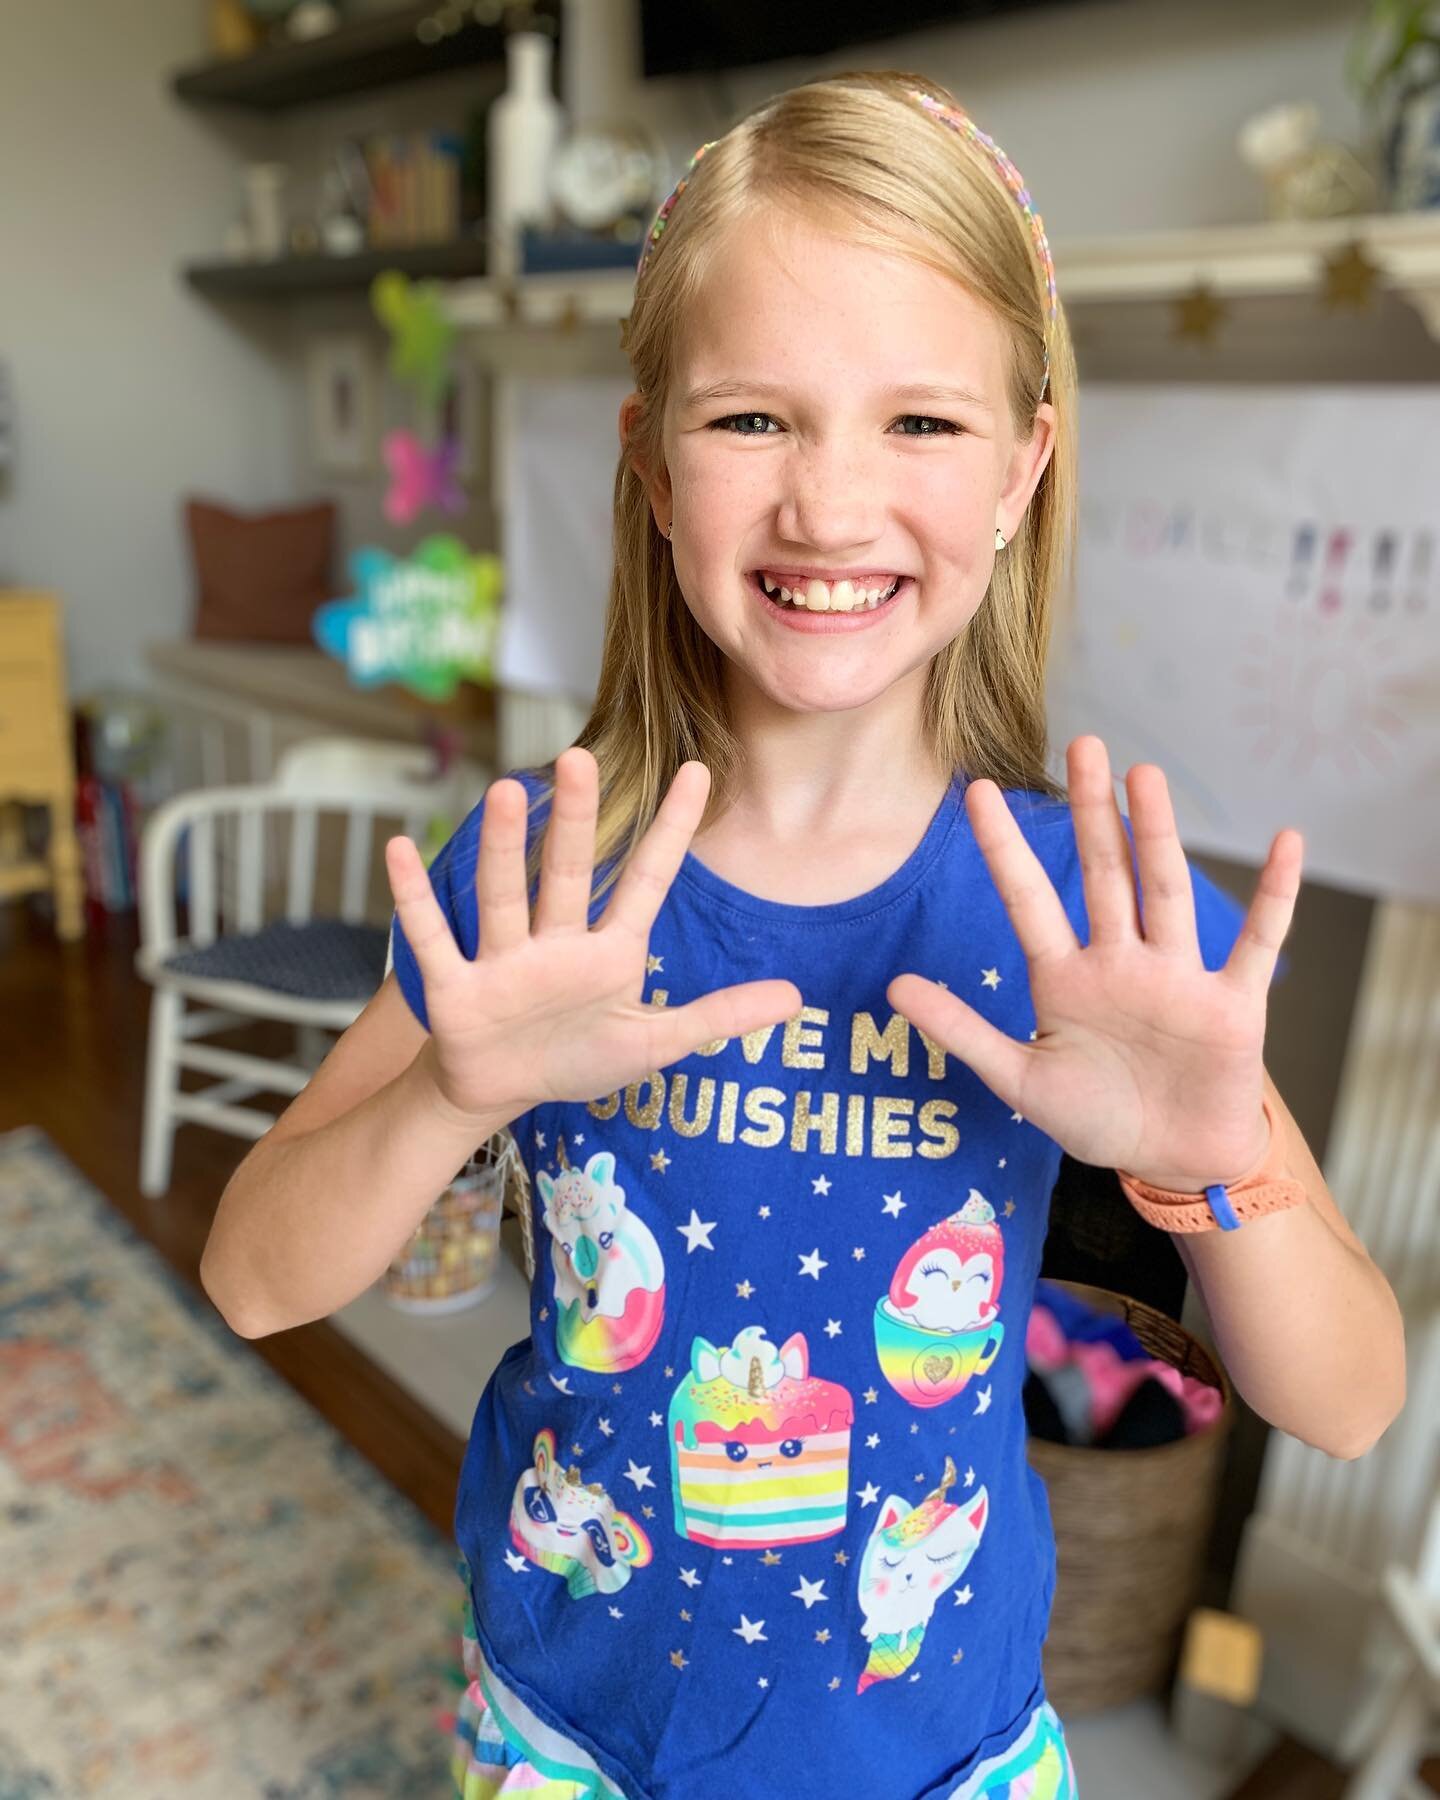 This kid is two whole hands today. We started the celebration with family over the weekend and carried it on through today. 🎂  She&rsquo;s about as sweet as they come. She&rsquo;s got a tender heart and is always bubbling over with joy over one thin